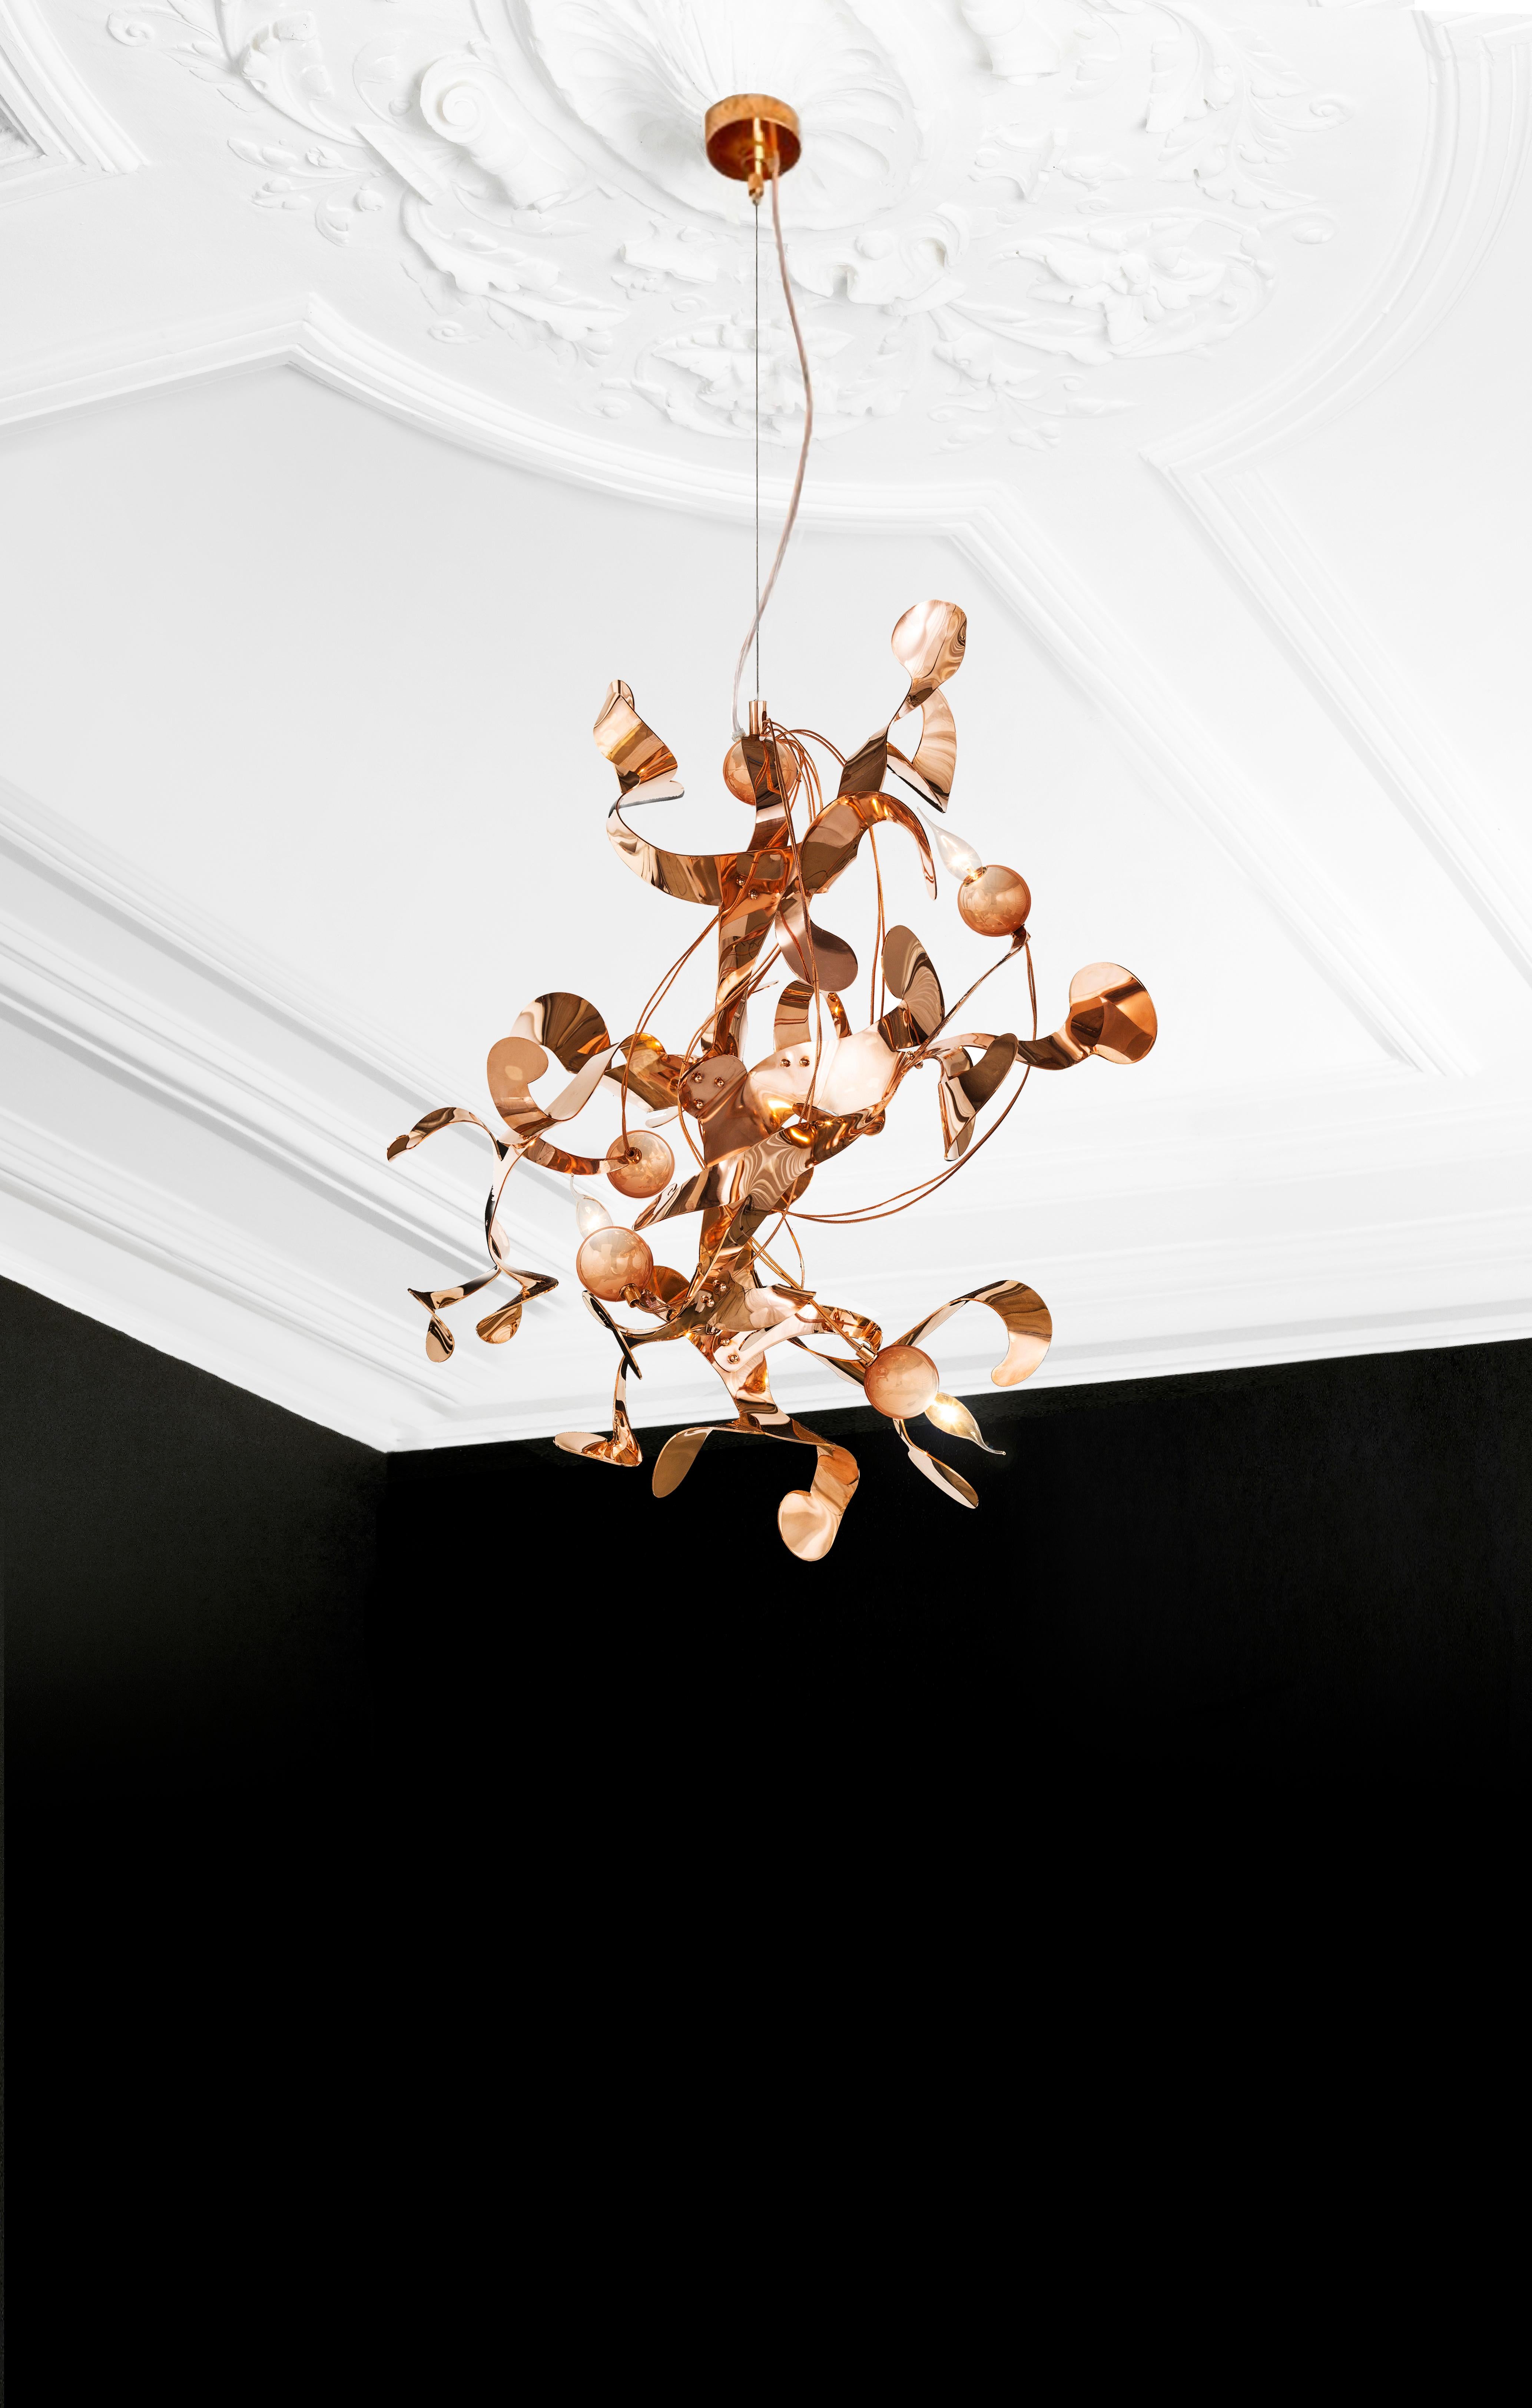 The Kelp modern pendant in a copper finish, designed by William Brand, is a free and playful organic lighting sculpture in the collection of Brand van Egmond. The seemingly randomness of the lighting sculpture, yet carefully arranged ornaments will